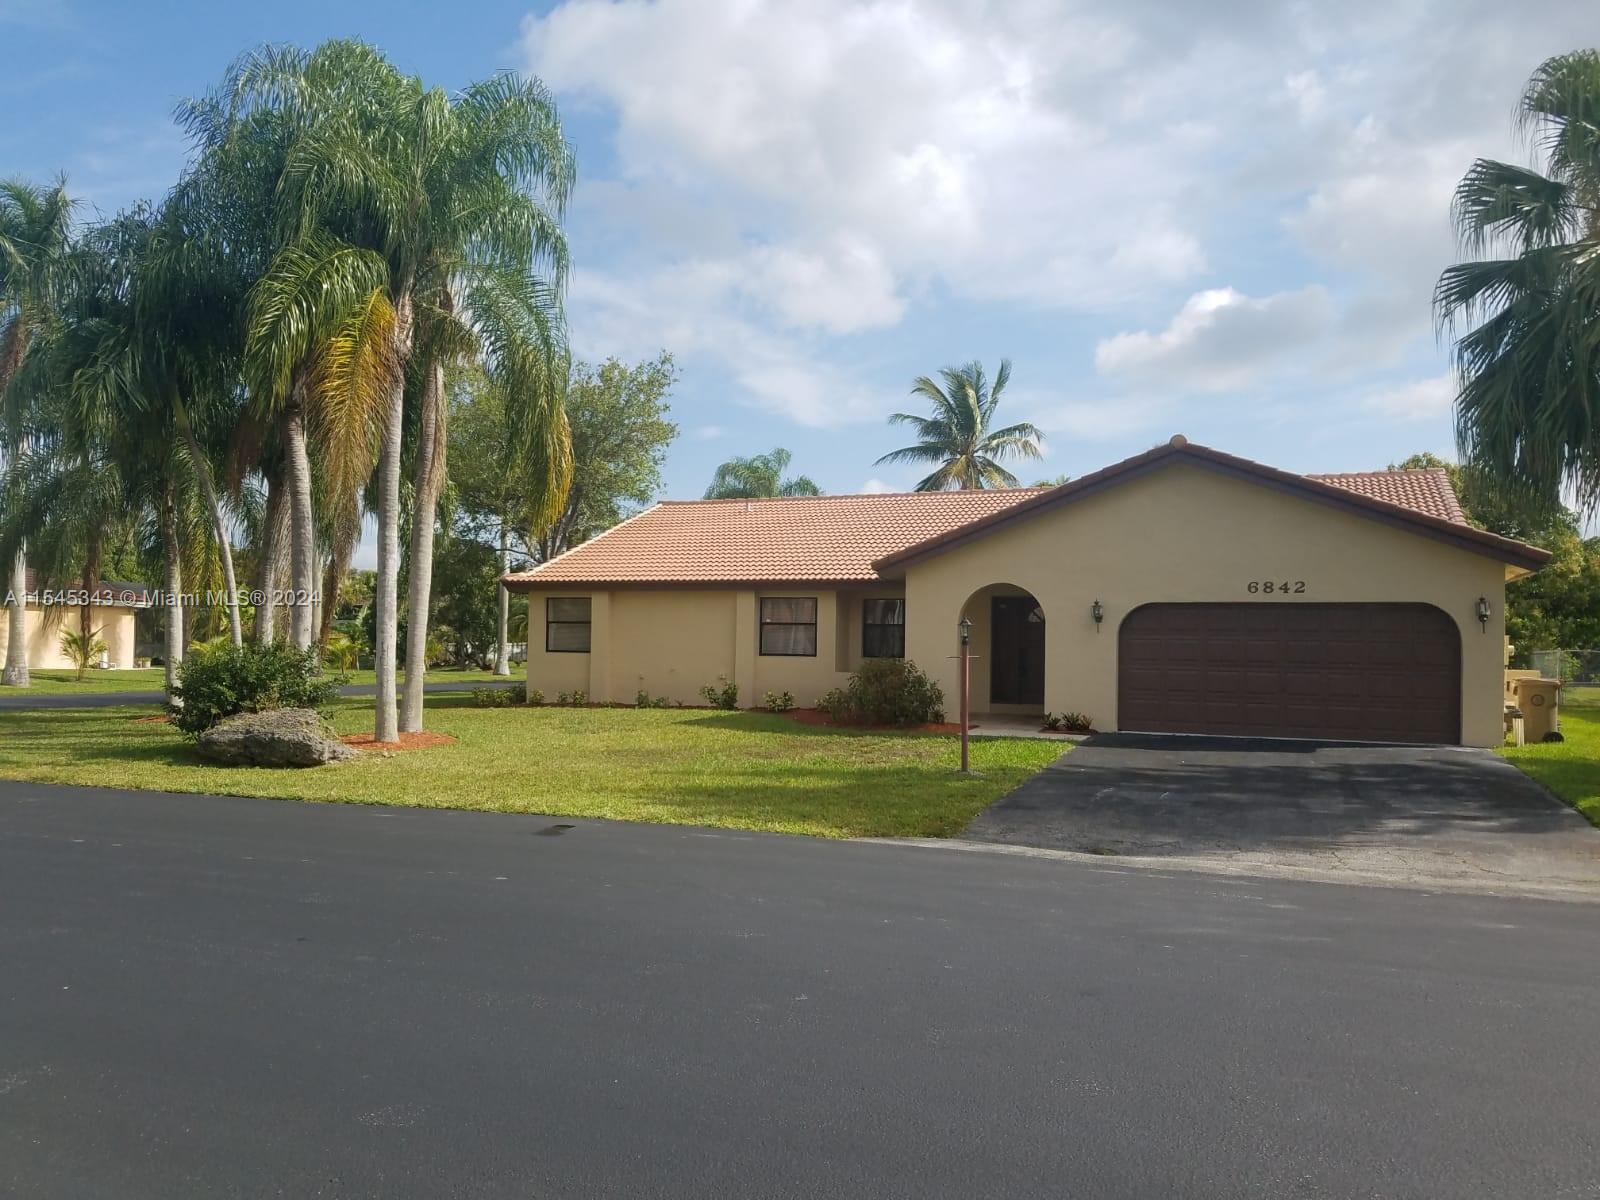 6842 E Longbow Bnd 6842, Davie, Florida 33331, 3 Bedrooms Bedrooms, ,2 BathroomsBathrooms,Residentiallease,For Rent,6842 E Longbow Bnd 6842,A11545343